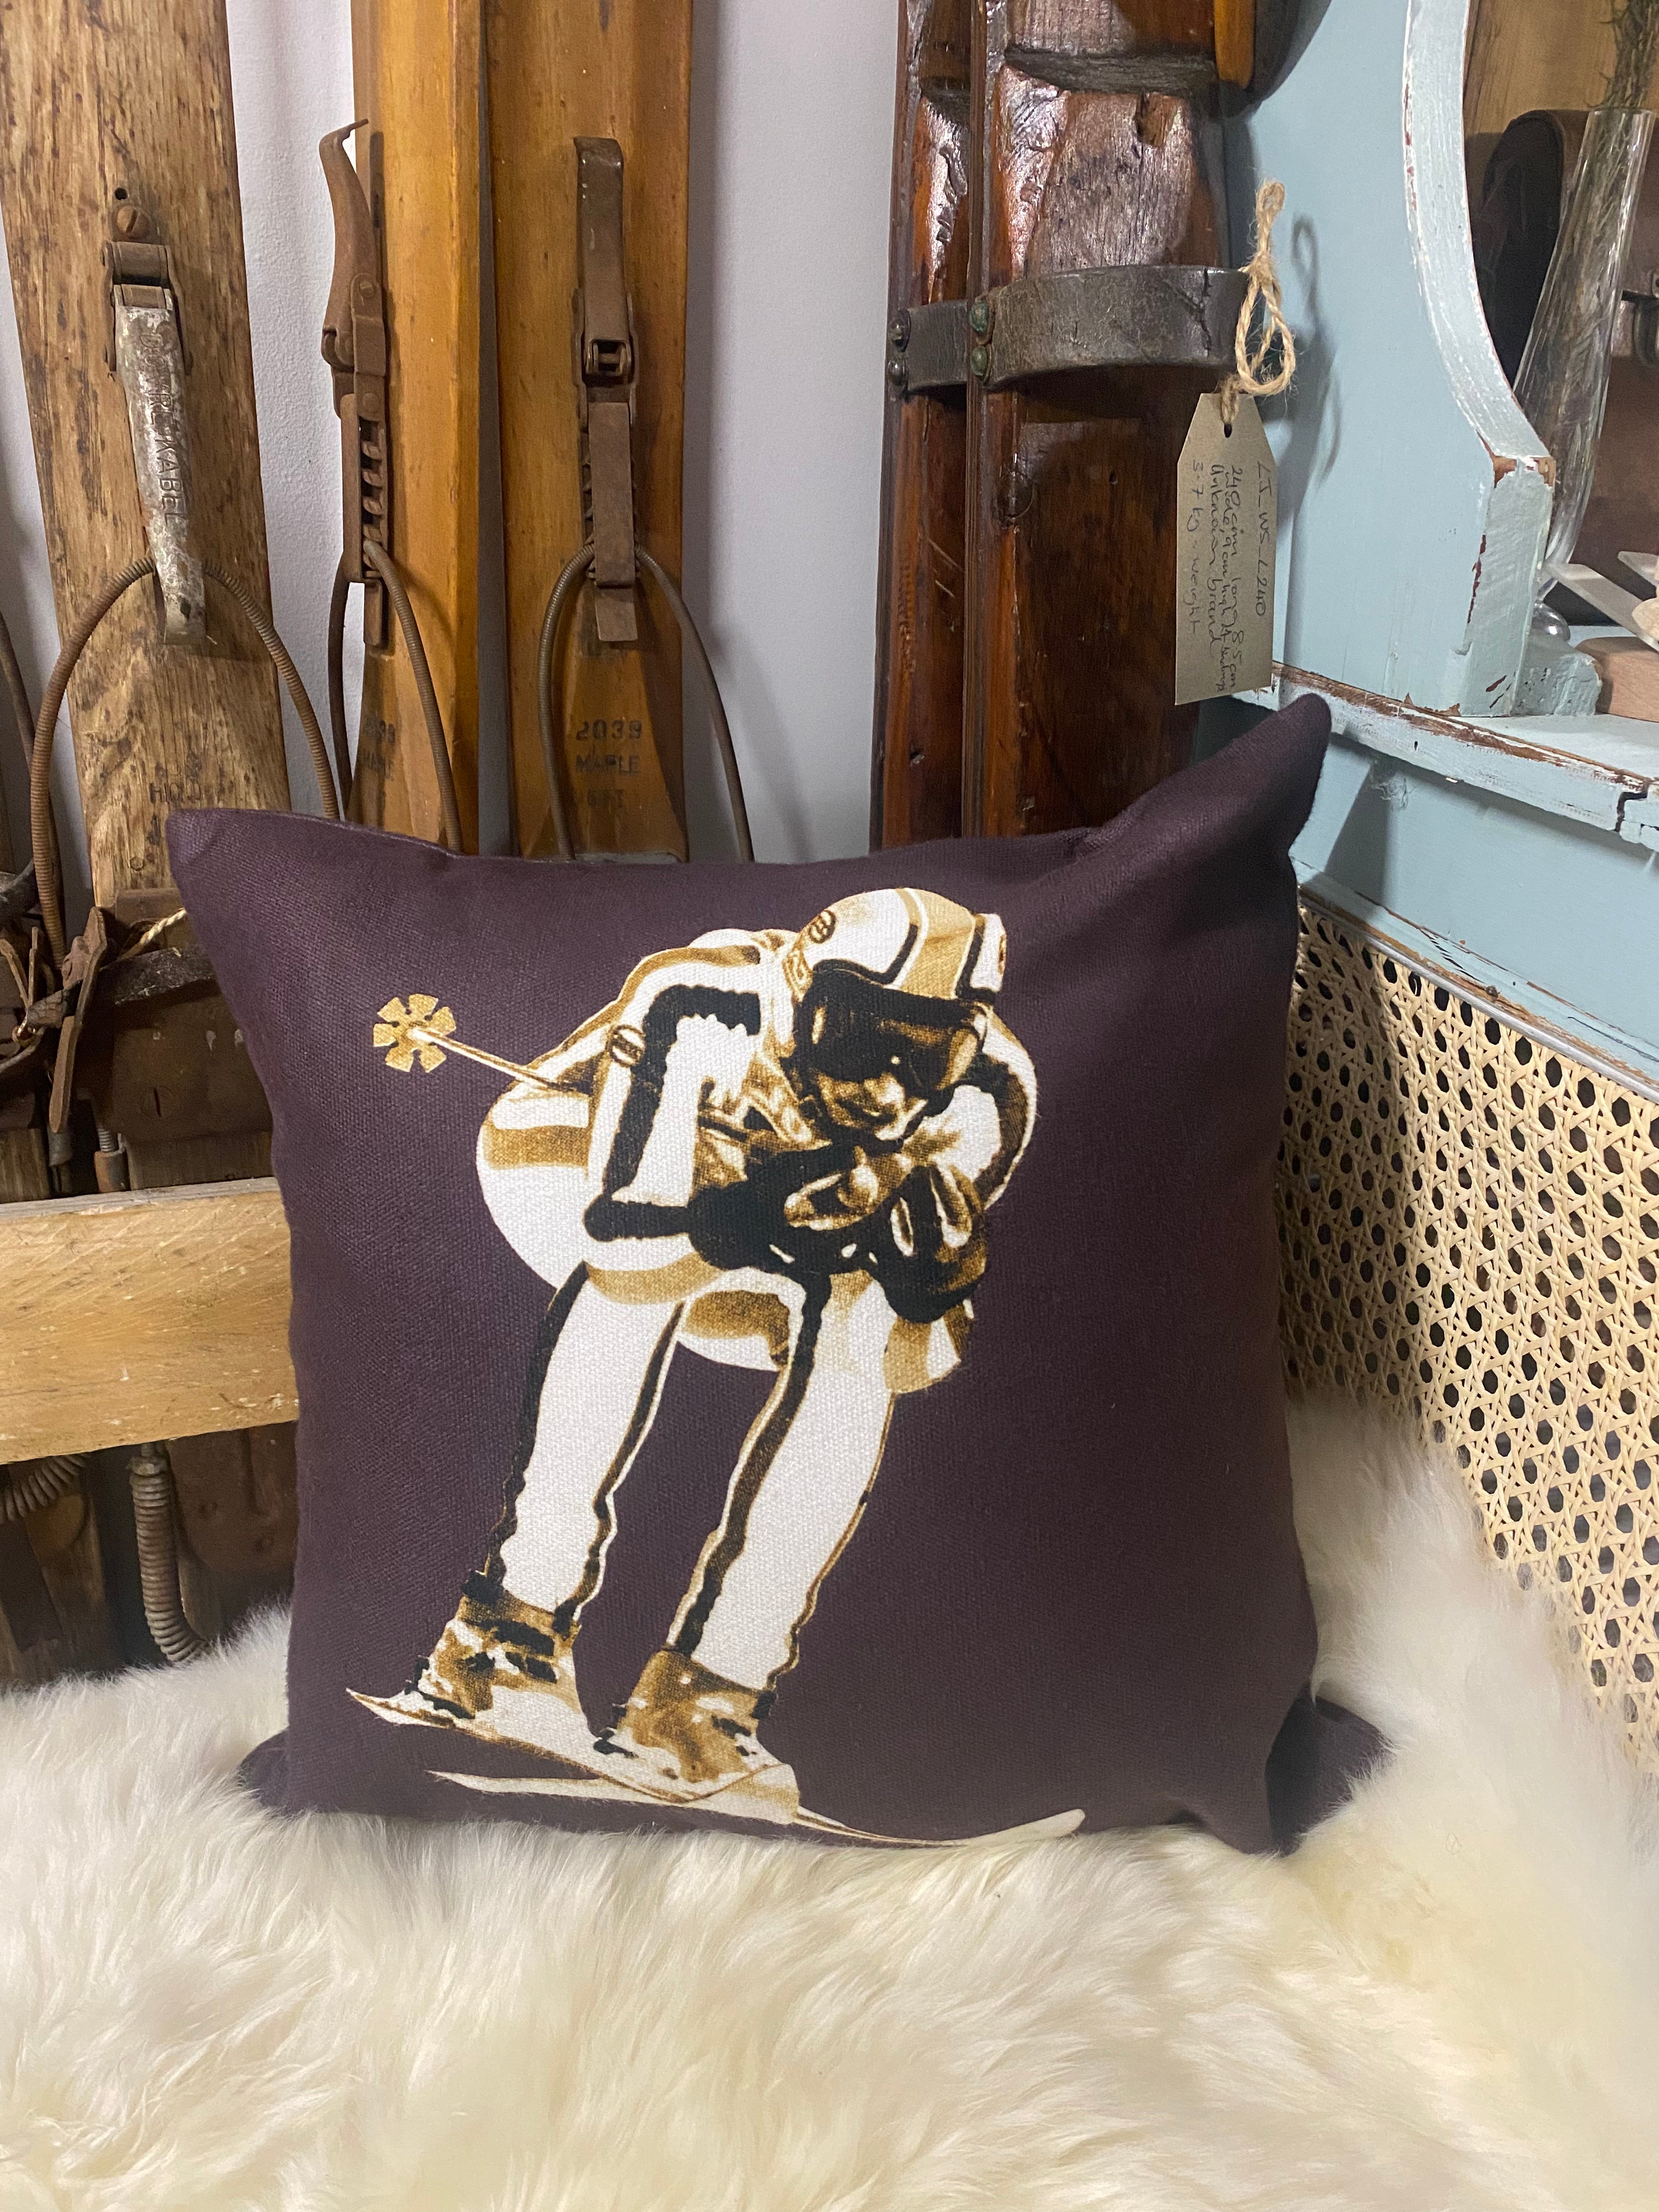 vintage ski racer graphic in white & beige on chocolate coloured cushion, on a white sheepskin against vintage wooden skis and a blue dresser